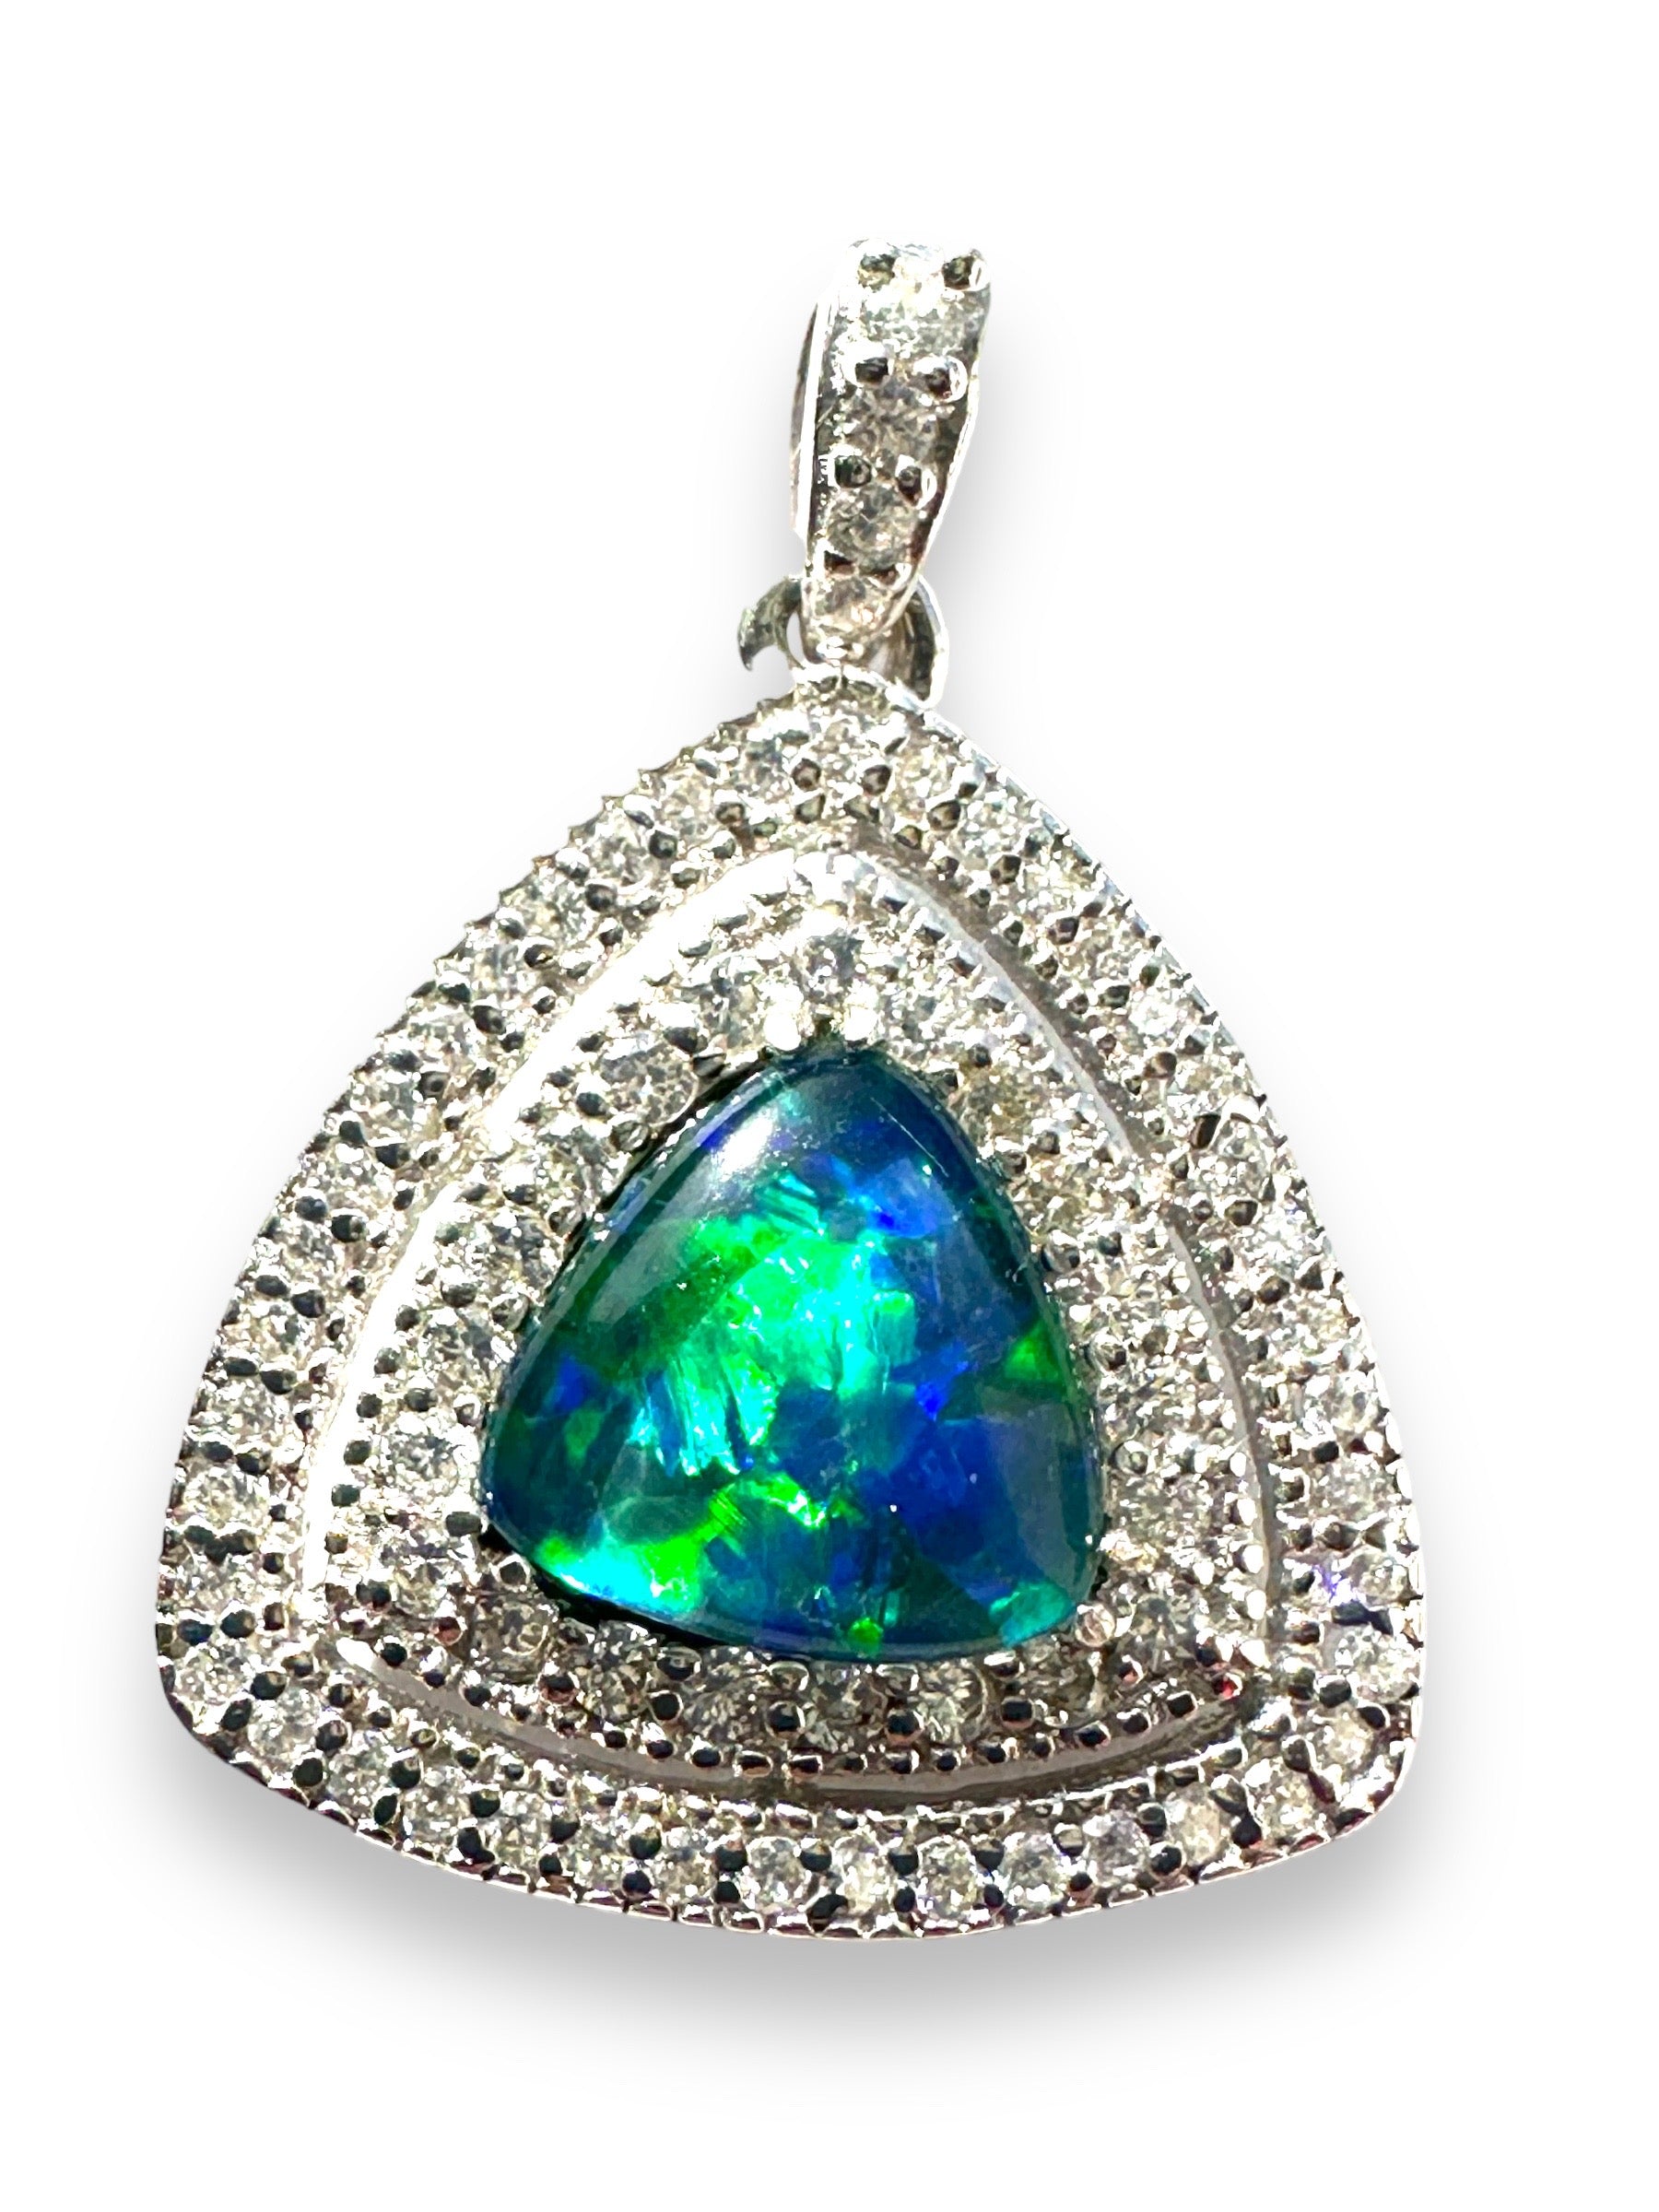 Gorgeous Australian Triplet Opal and Sterling Silver Pendant.